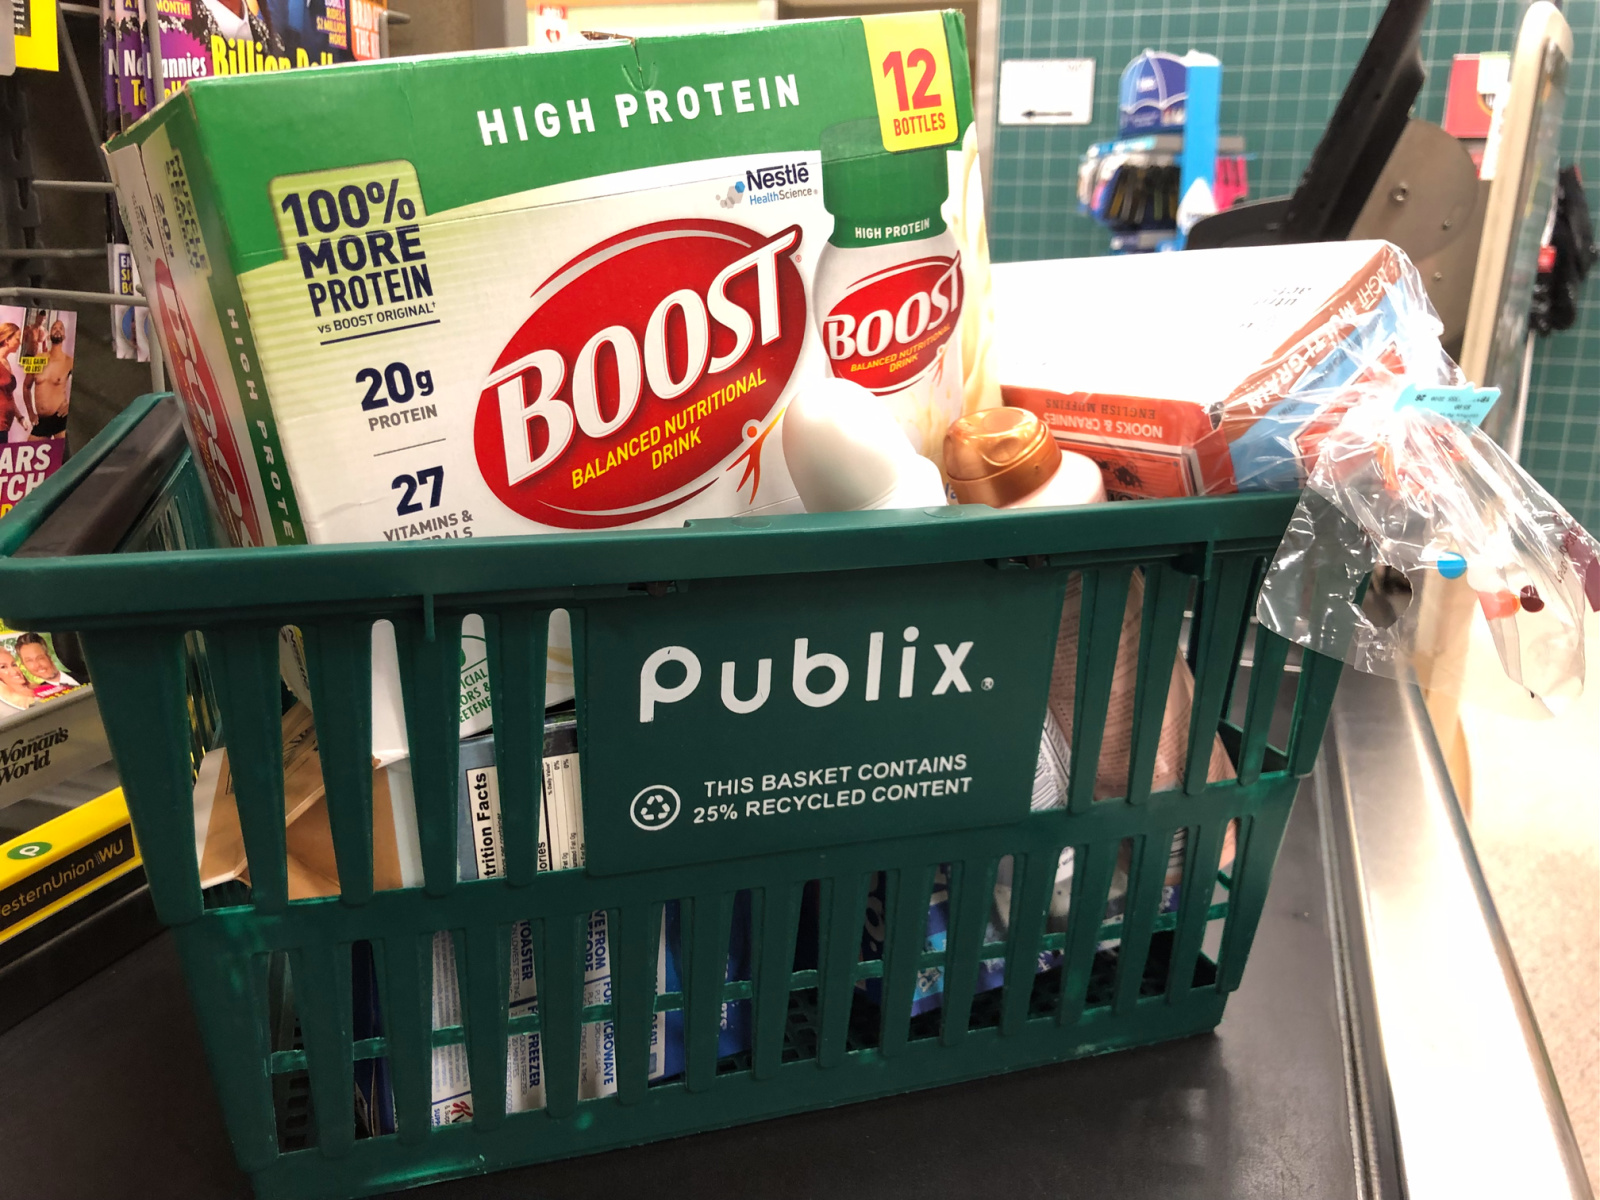 It’s A Great Week To Pick Up Your Favorite BOOST® Nutritional Drinks At Publix